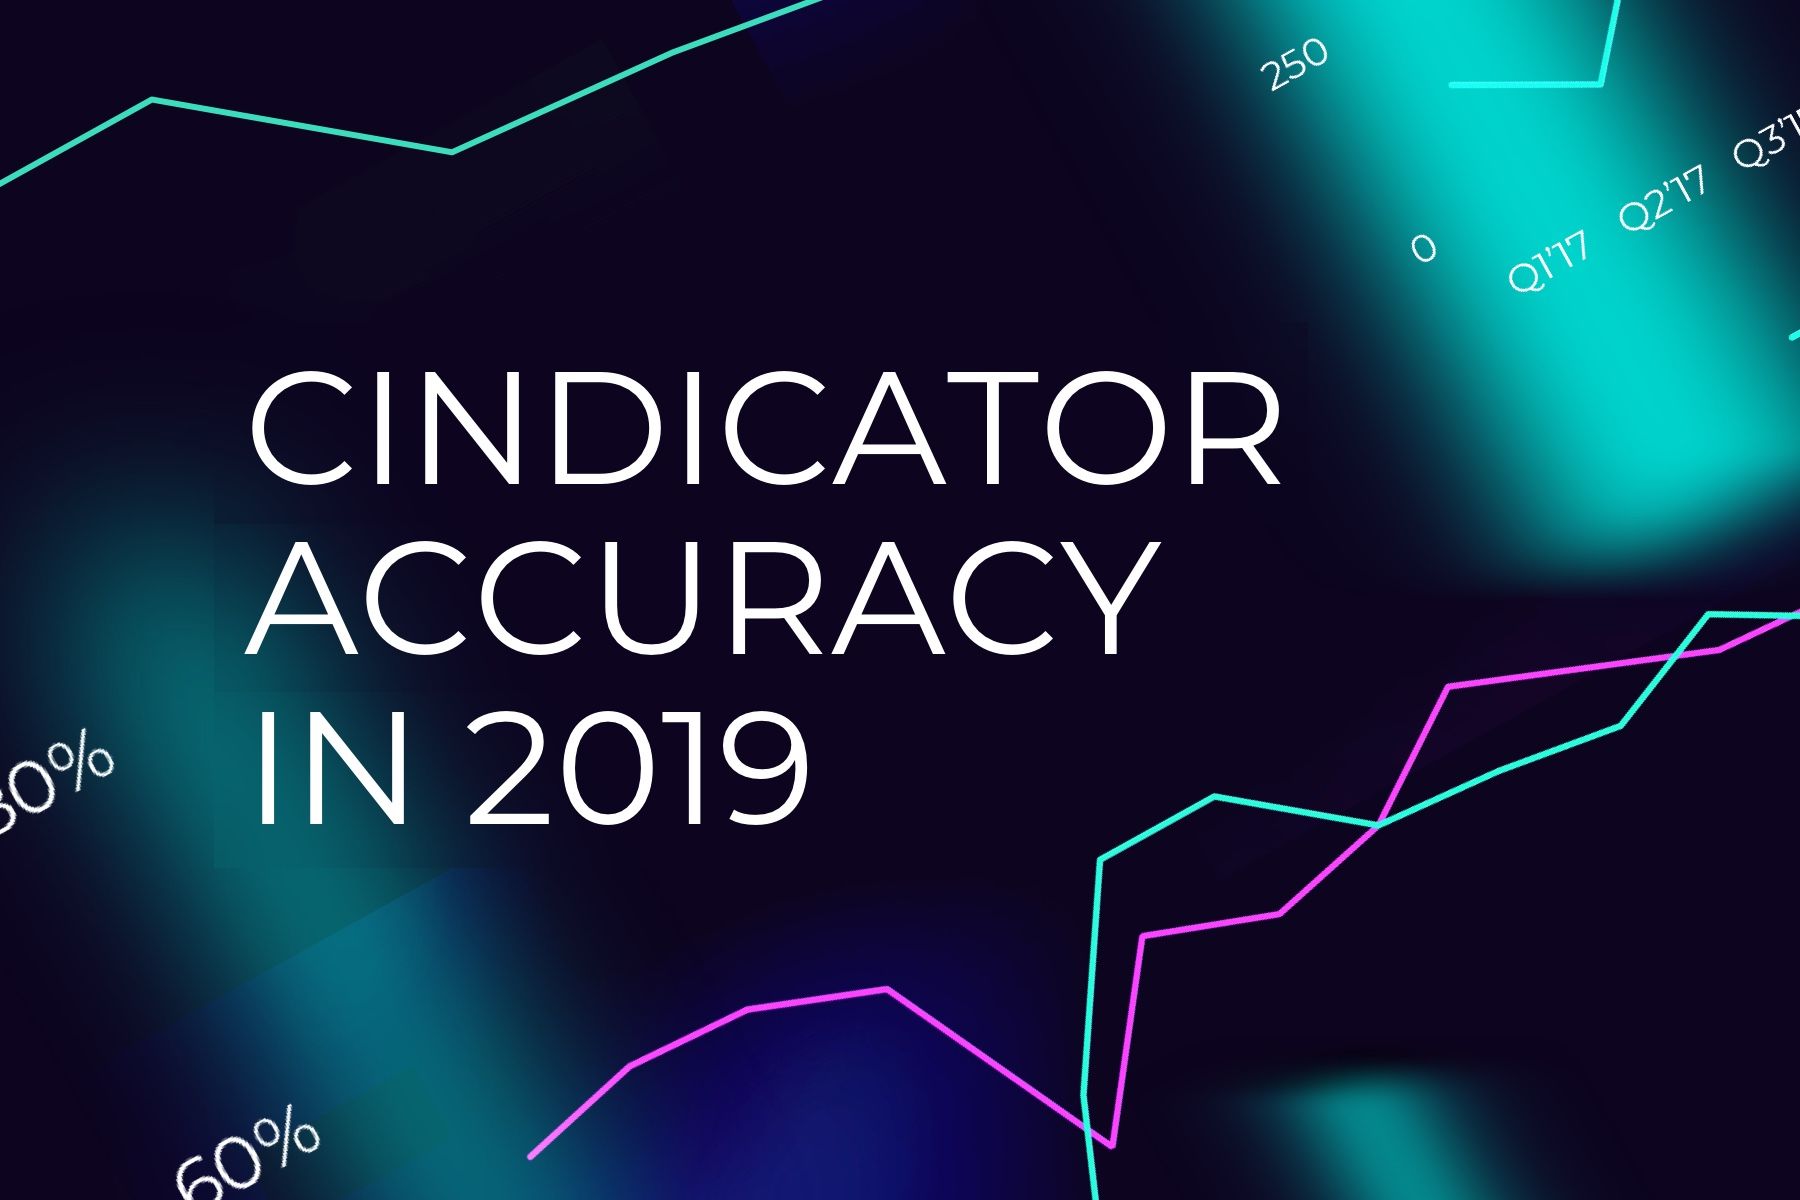 Cindicator accuracy: high sustainable level reached